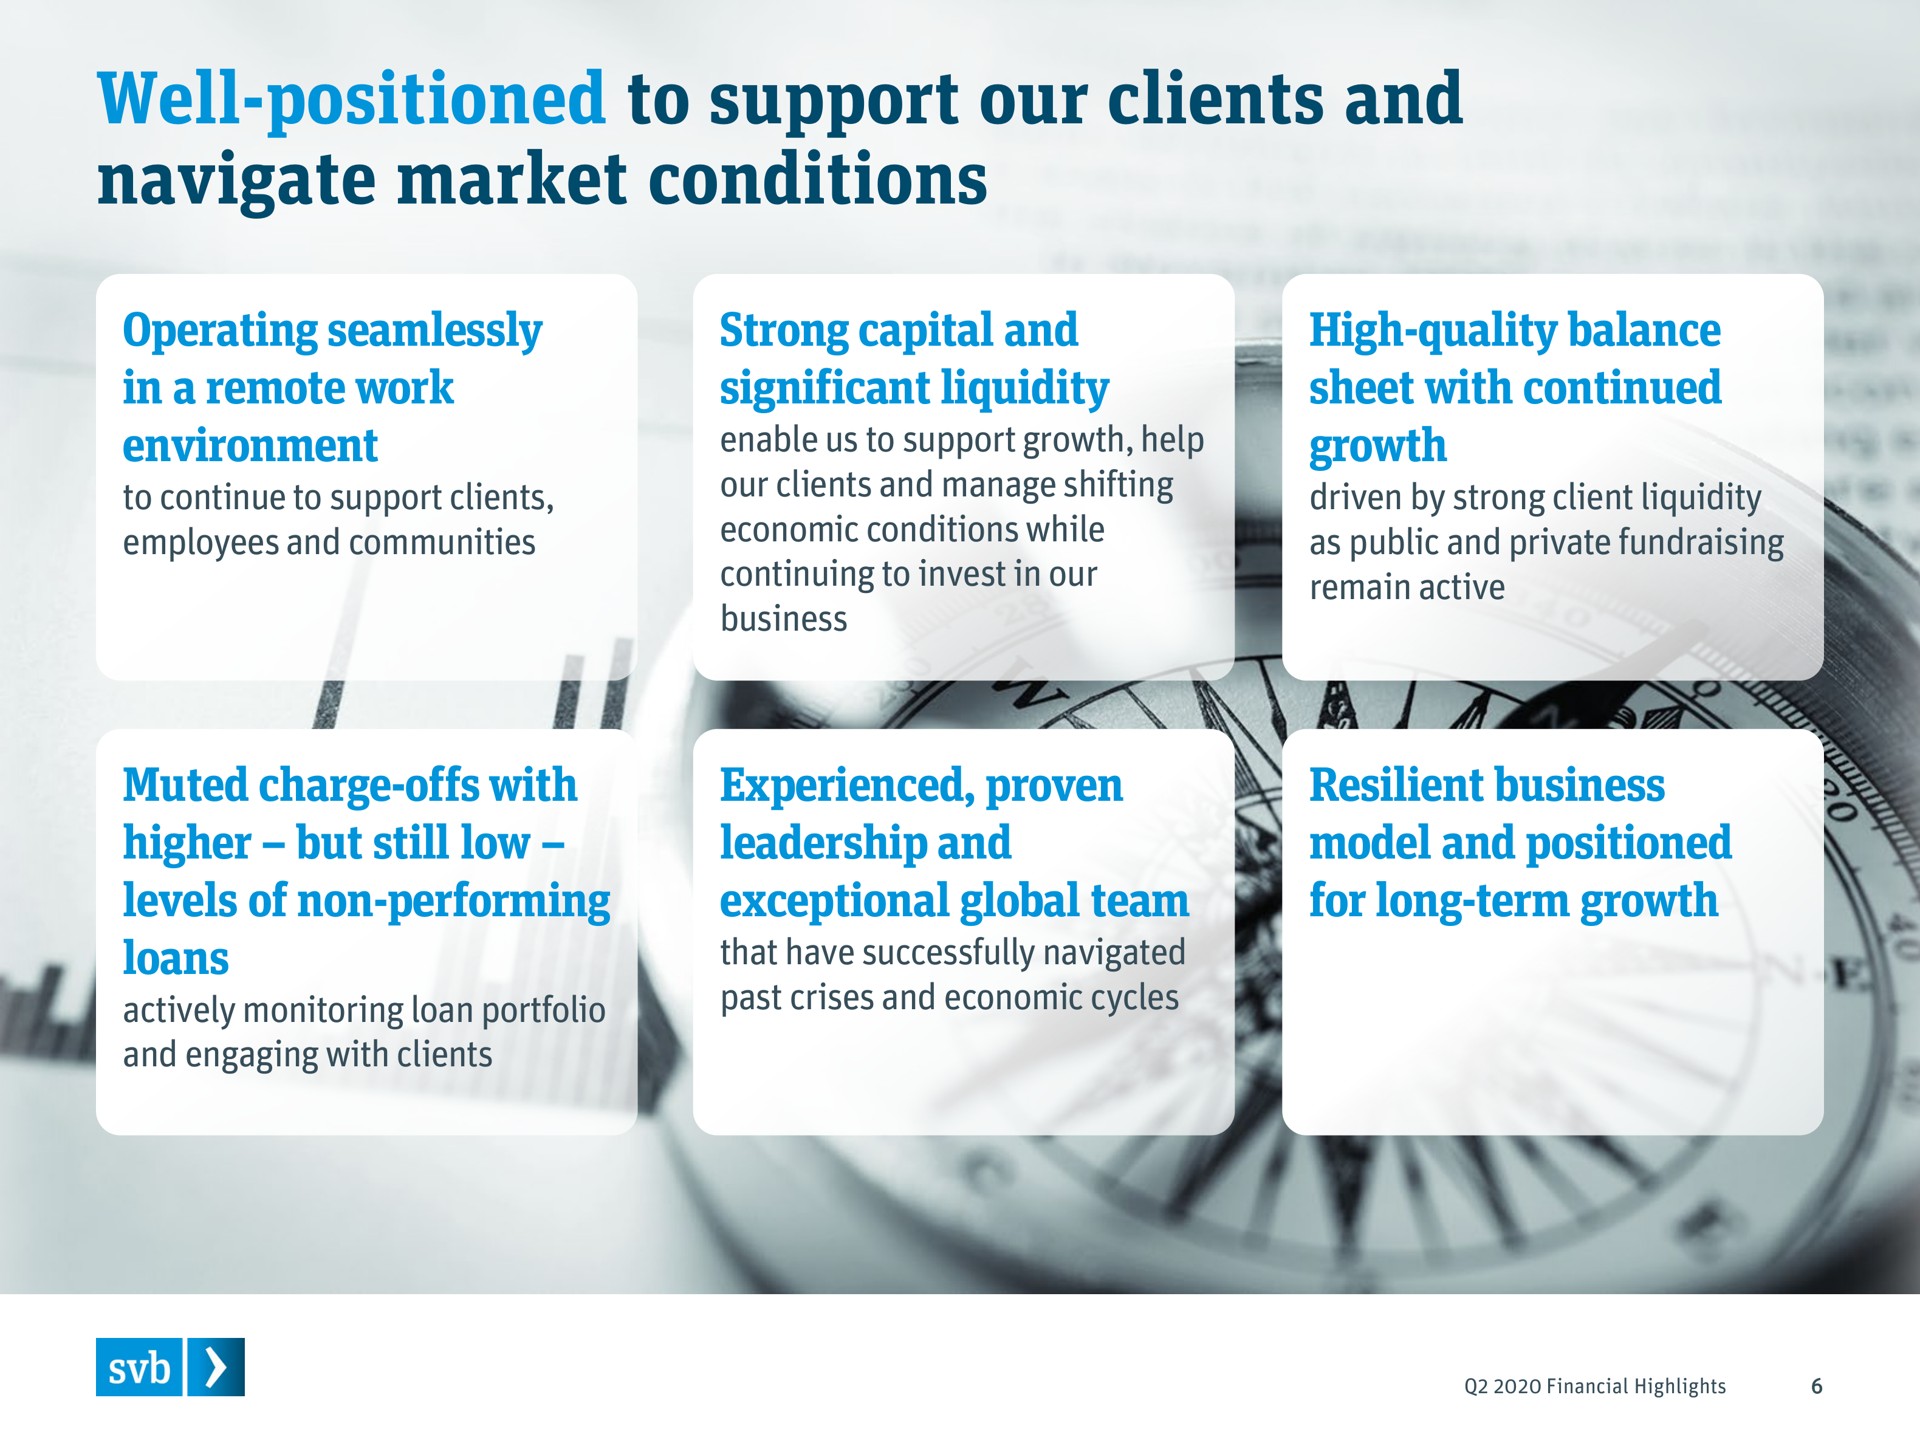 well positioned to support our clients and navigate market conditions sheet with continued | Silicon Valley Bank